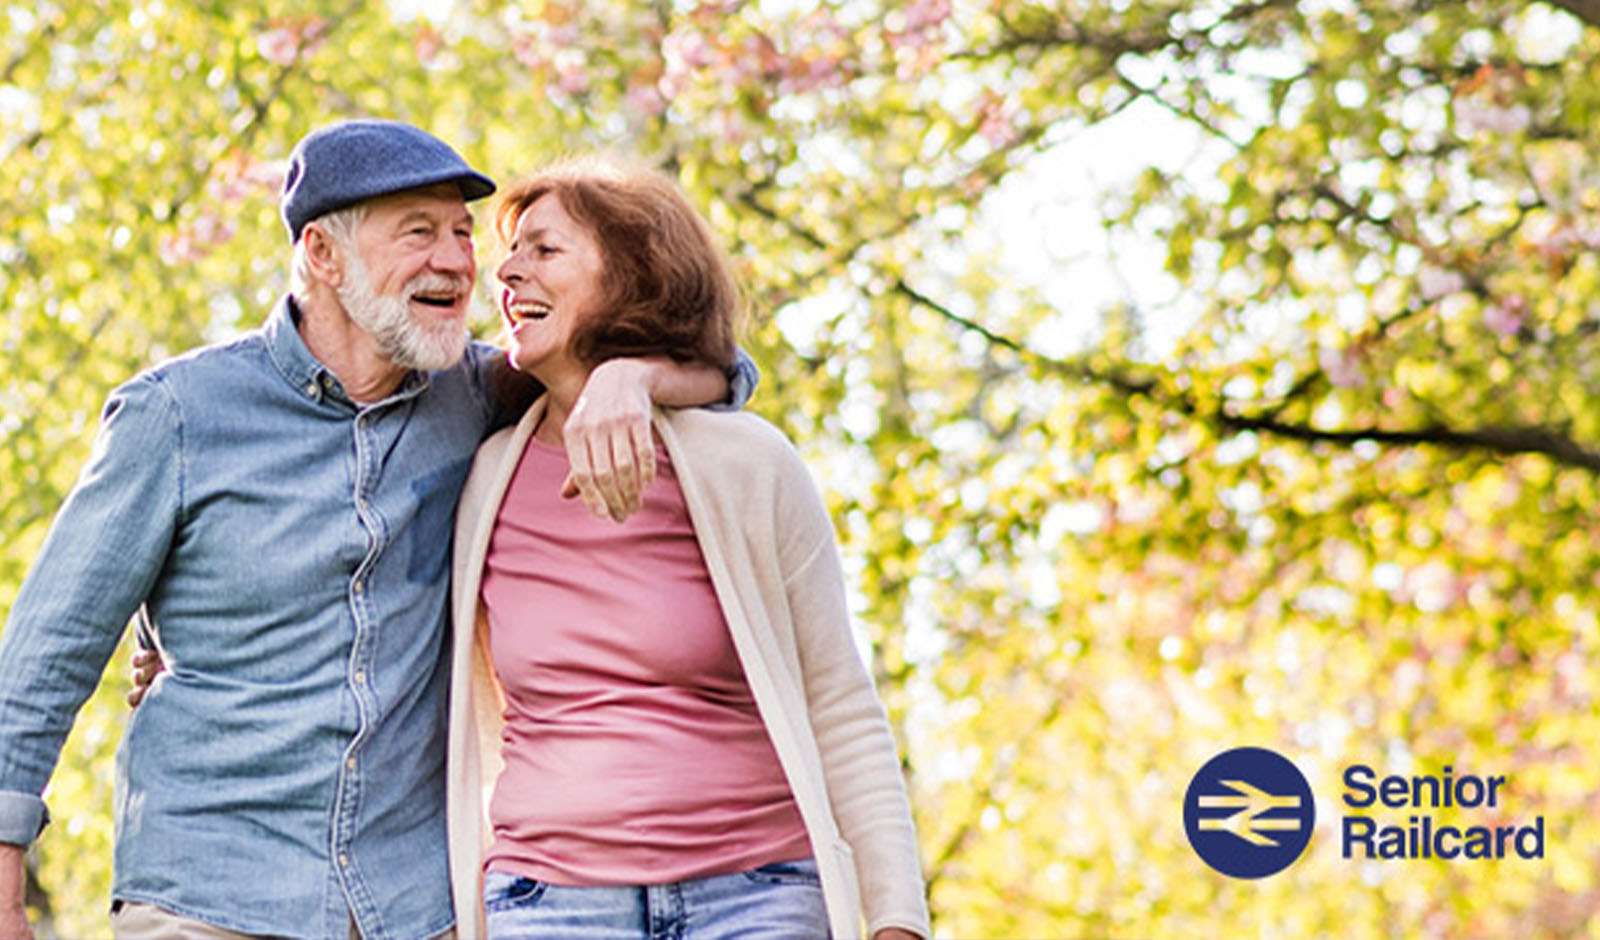 Travel more for less with a Senior Railcard